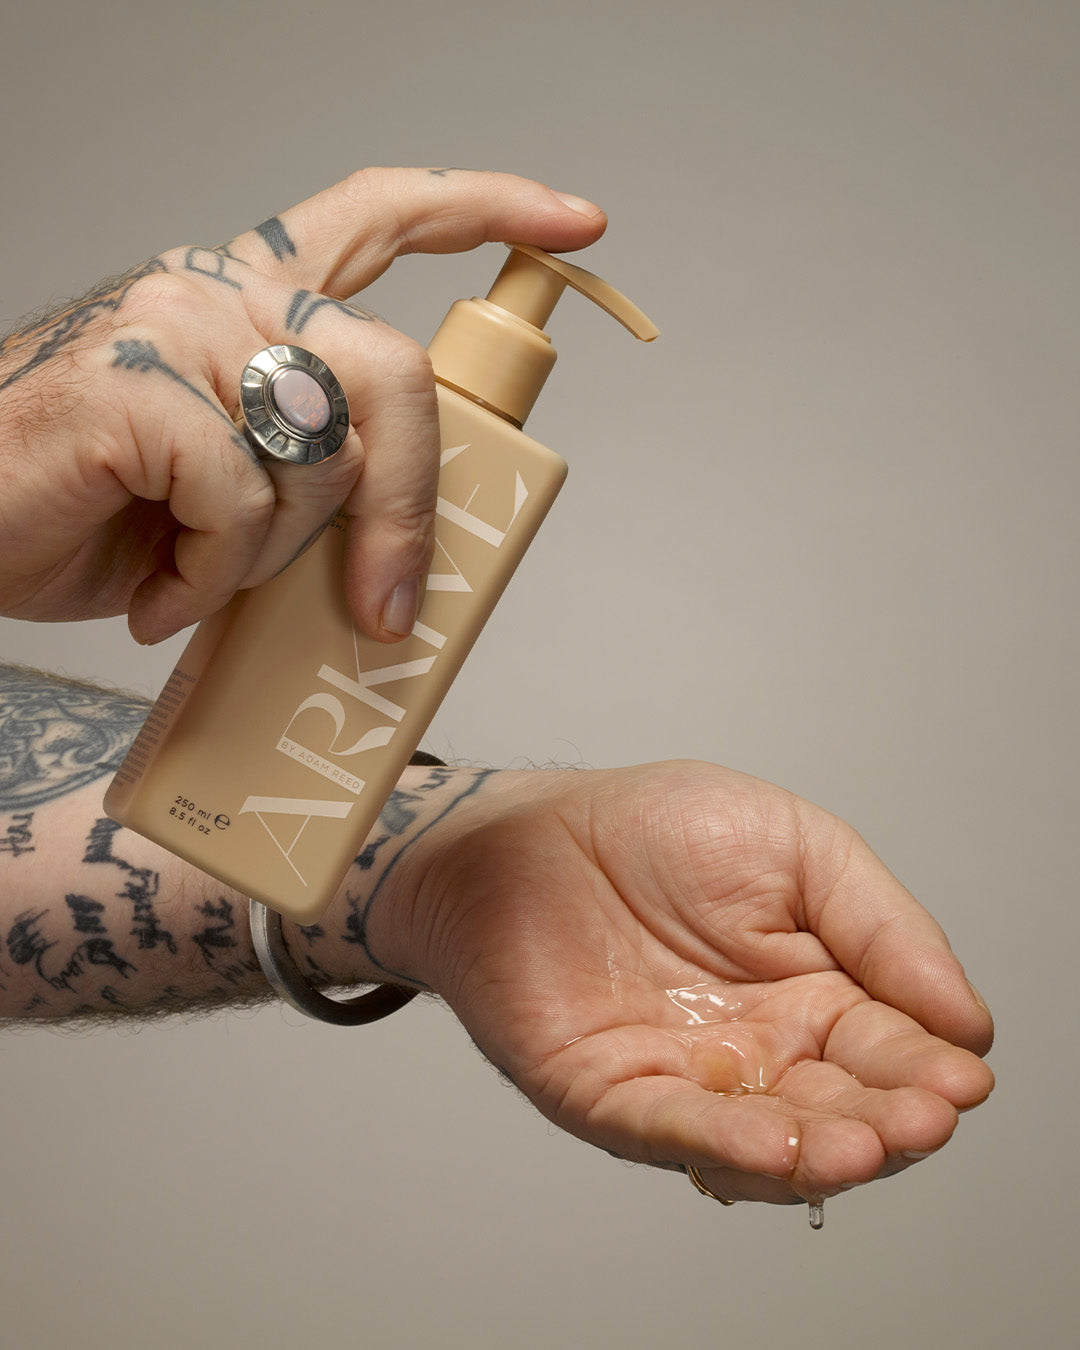 A bottle of Arkive's all day everyday shampoo poured into the hand